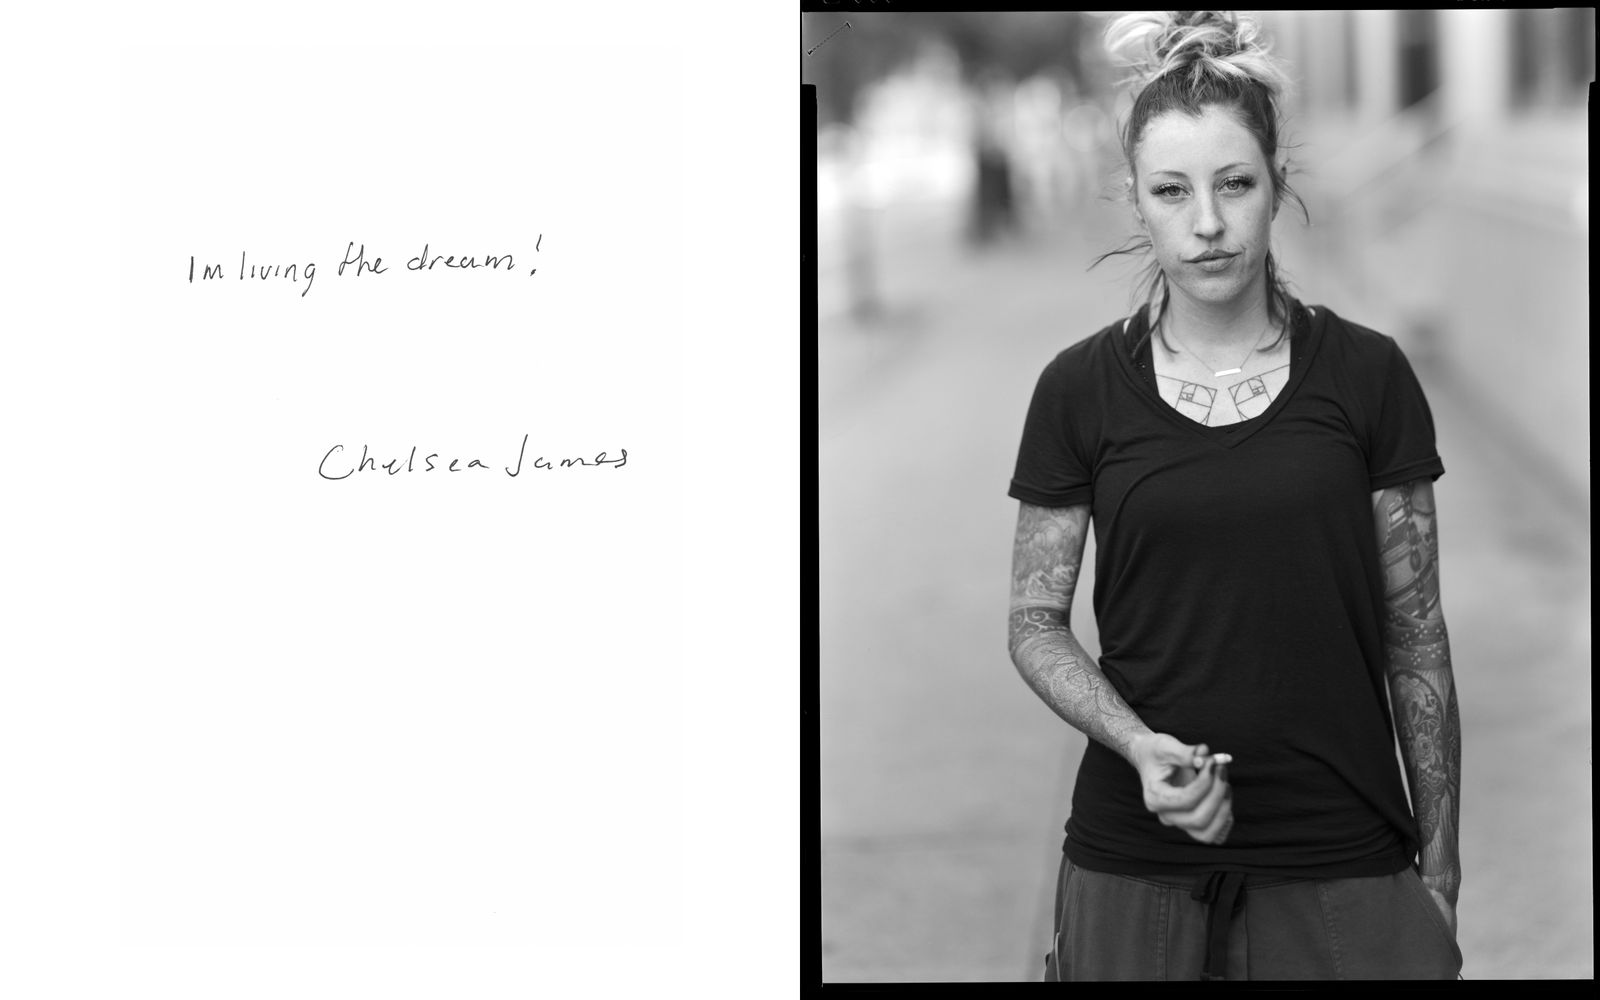 © Robert Kalman - Image from the I am here: the lesbian portraits photography project